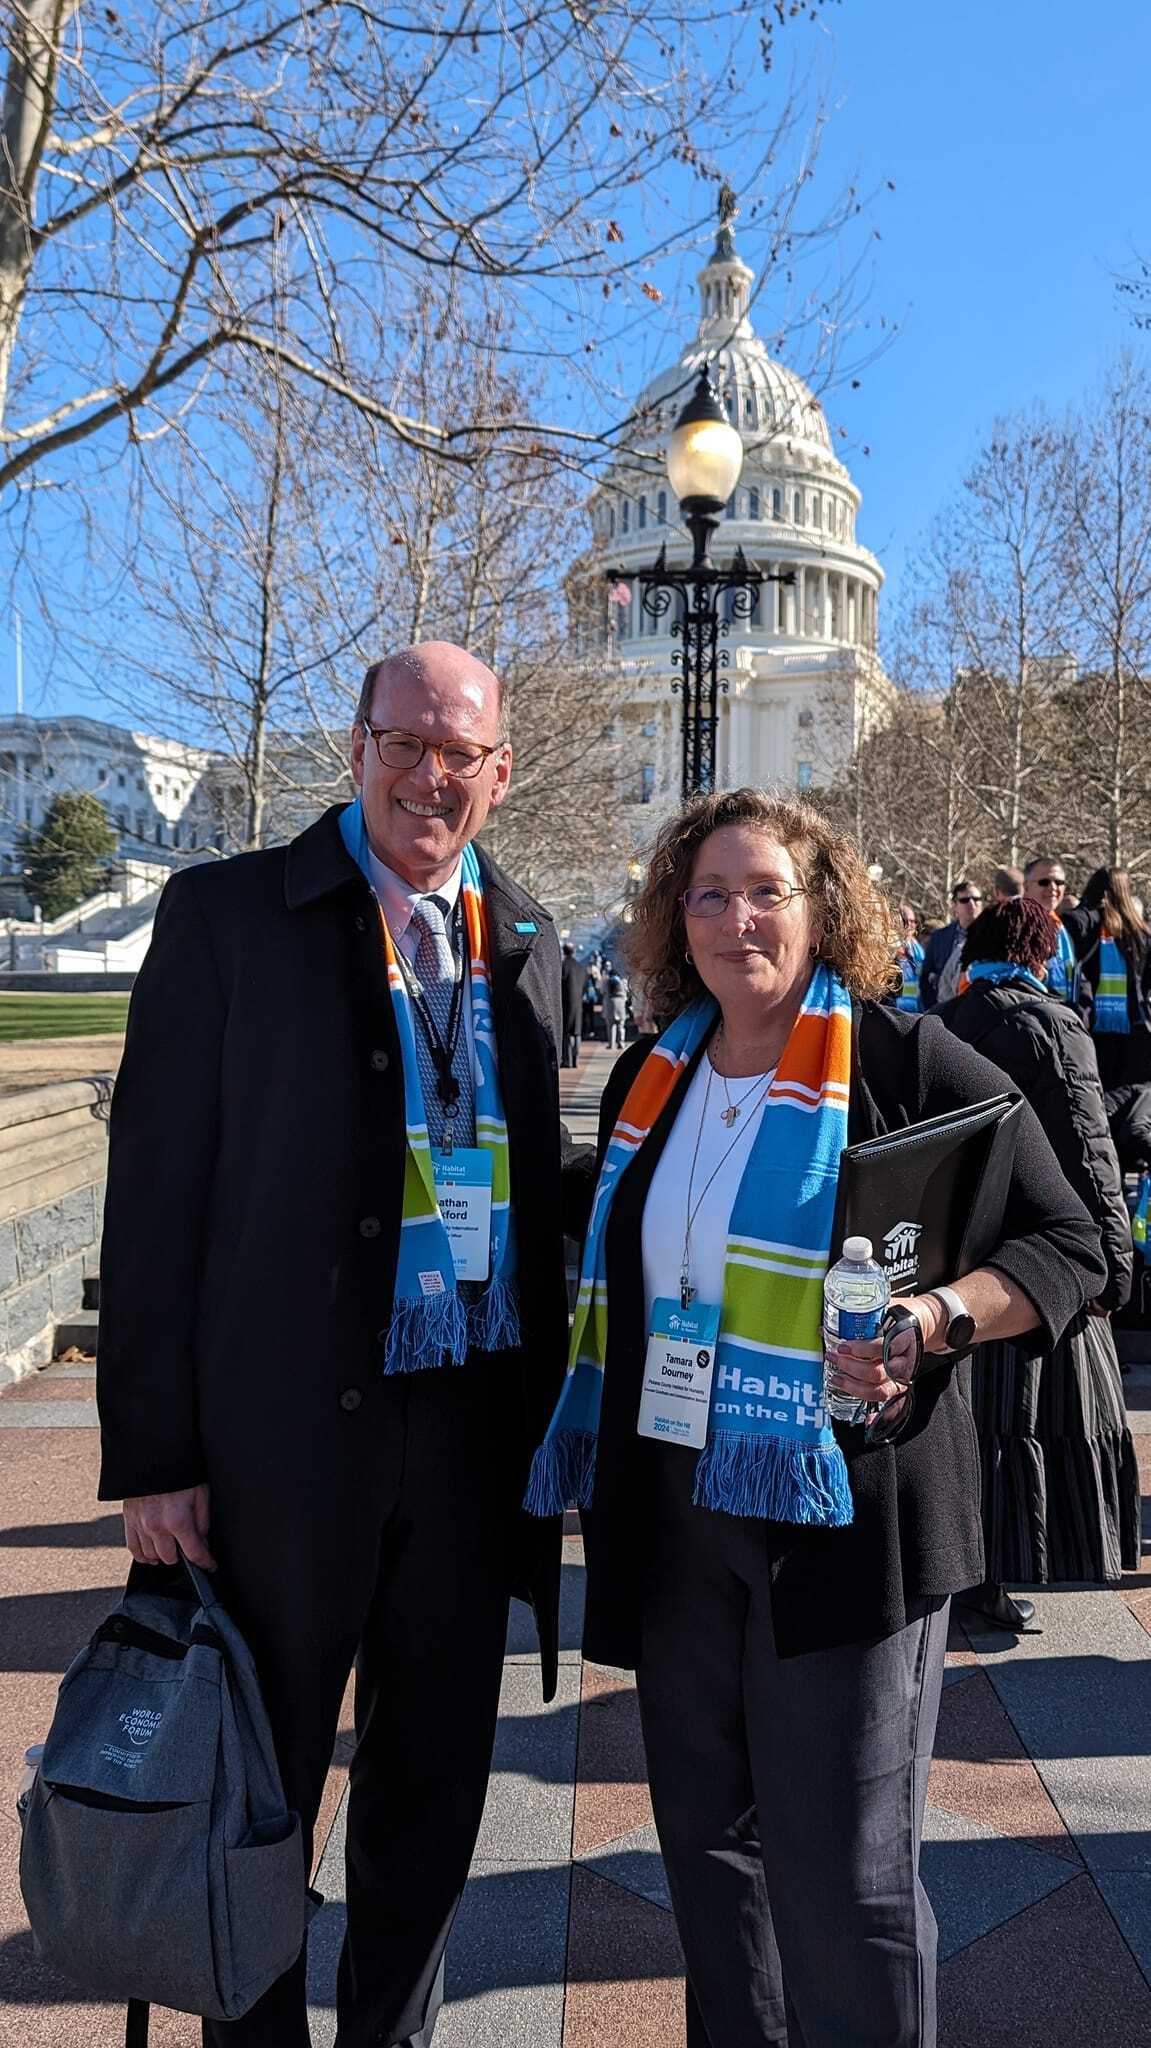 Habitat for Humanity CEO Jonathan Reckford and Pickens County Habitat for Humanity's Interim Executive Director Tamara Dourney paused for a quick photo before attending meetings.